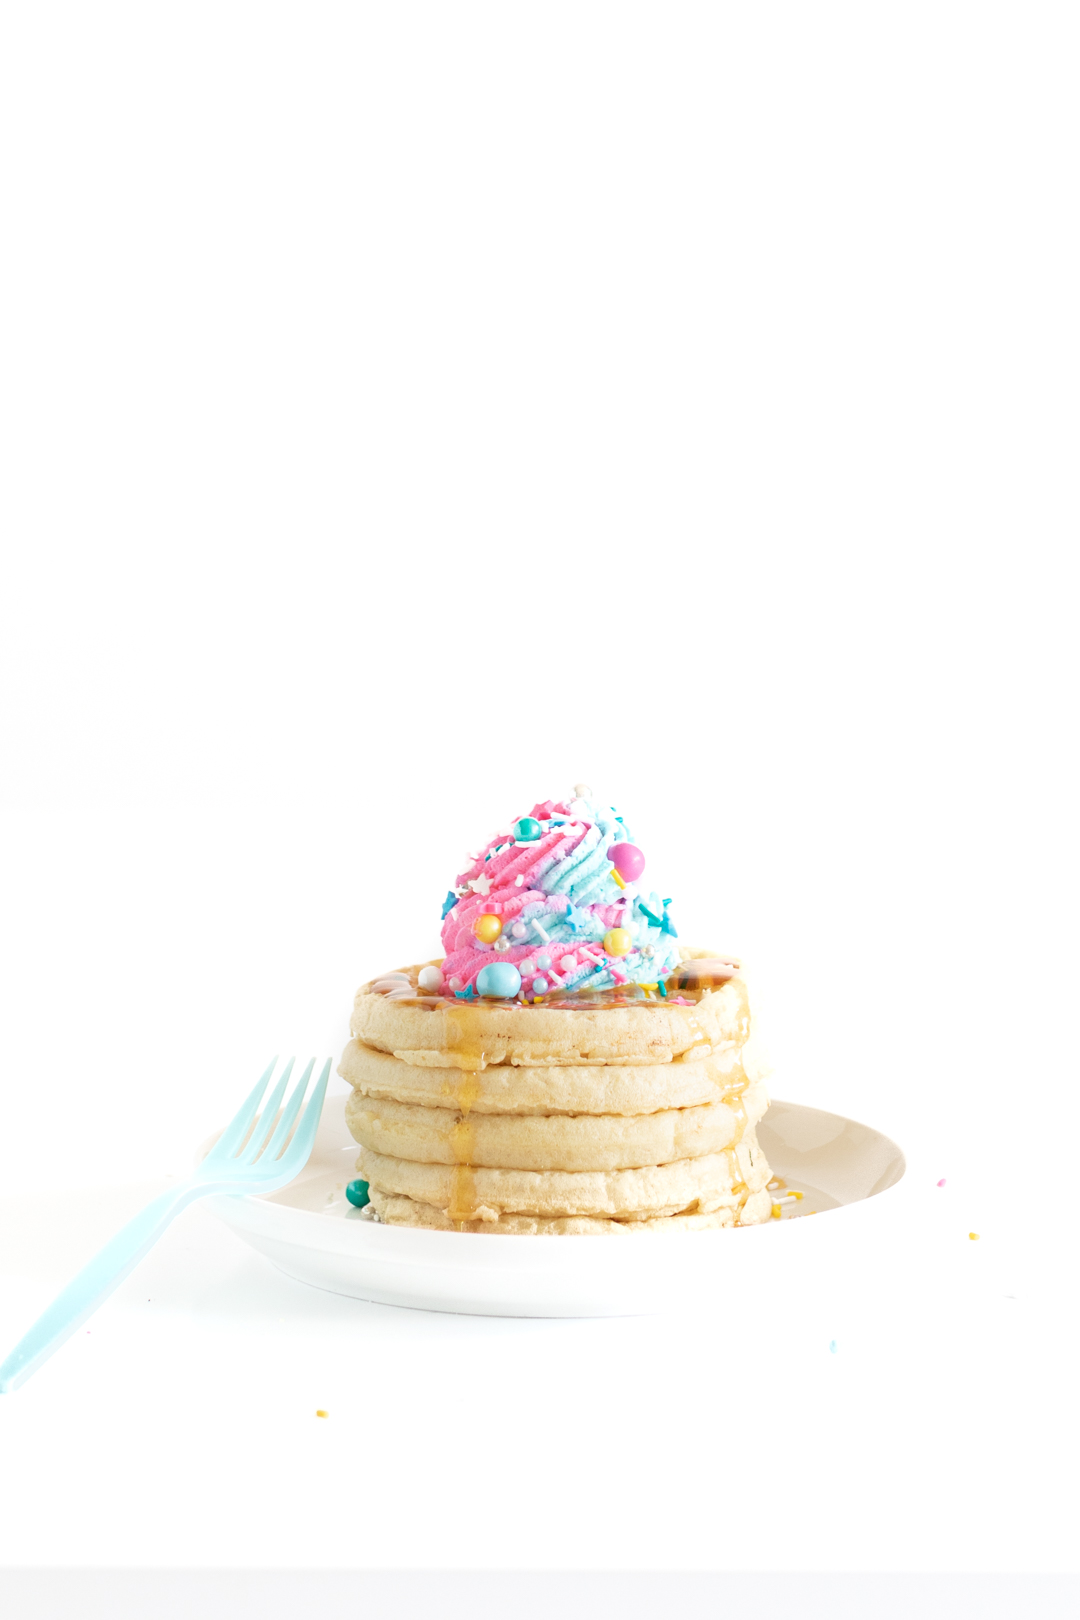 stack of 5 frozen waffles, toasted and topped with swirl of pastel whipped cream and matching sprinkles